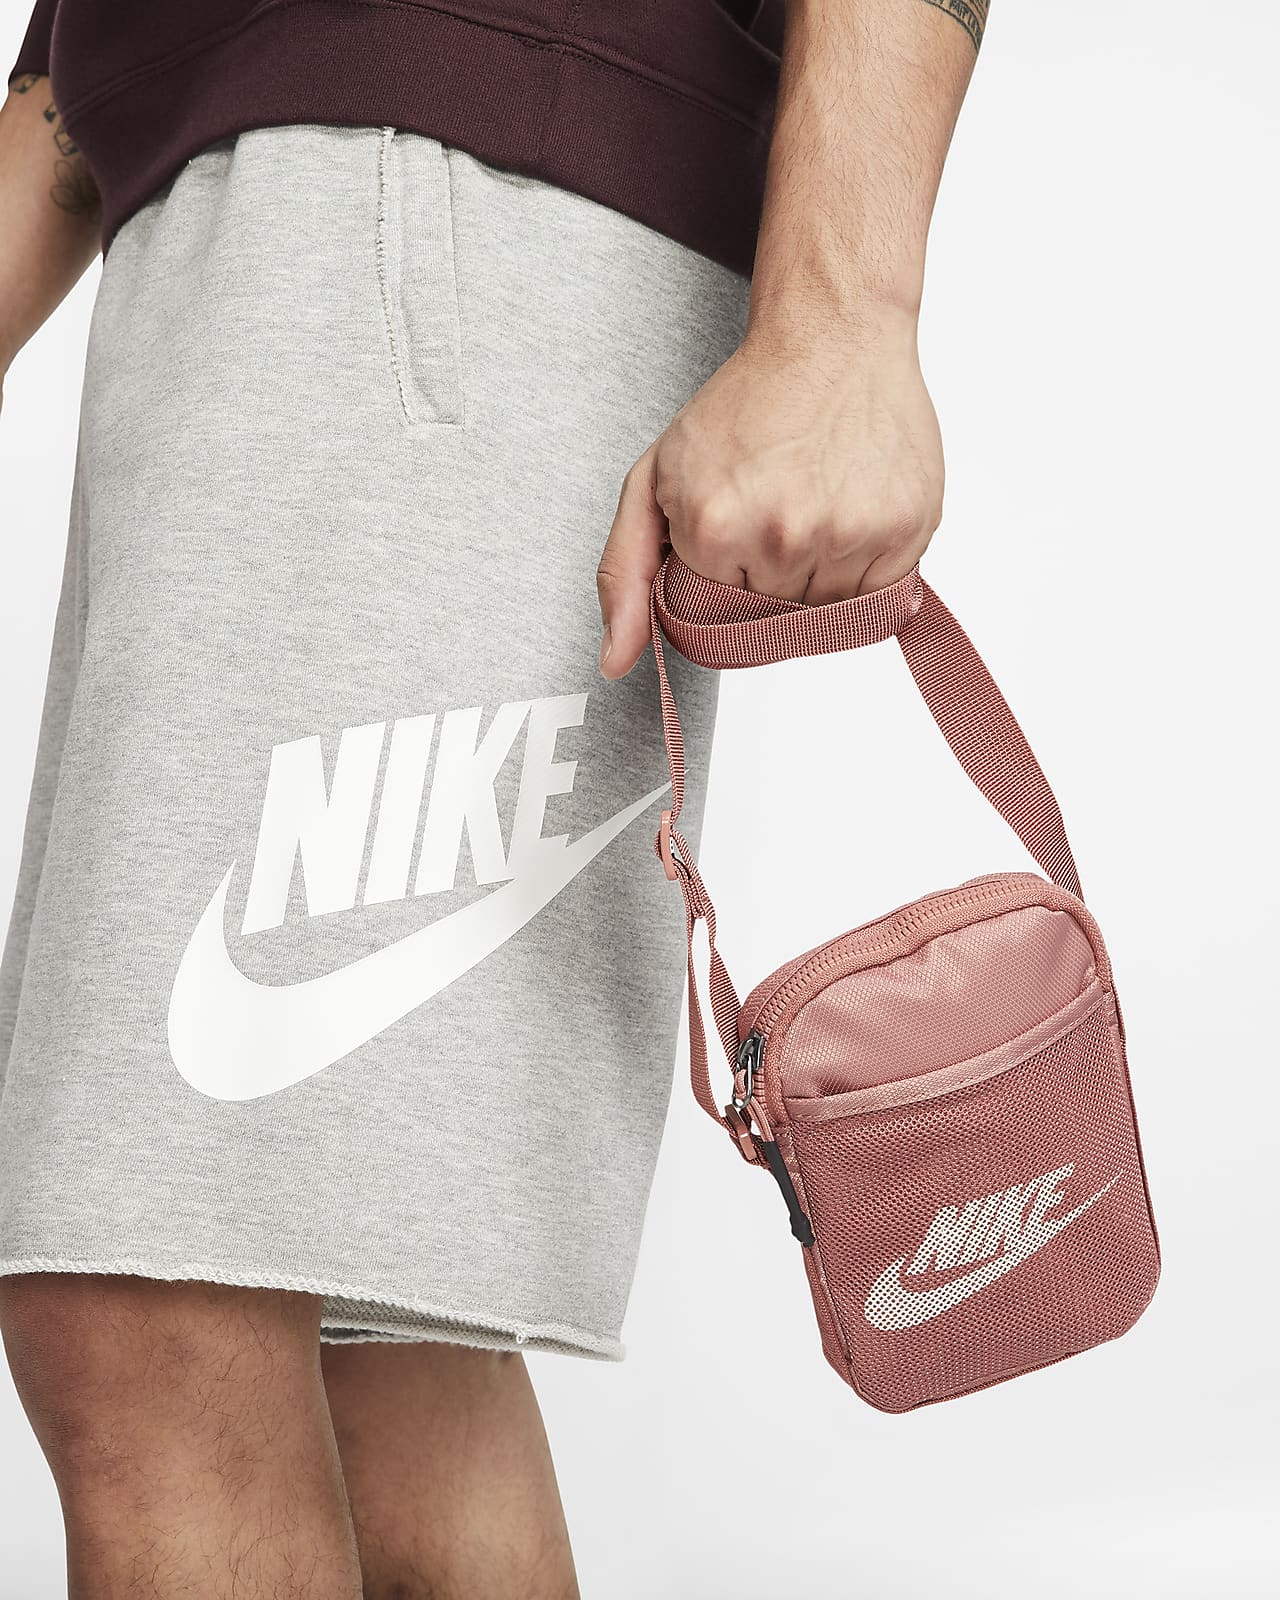 nike purses and other bags